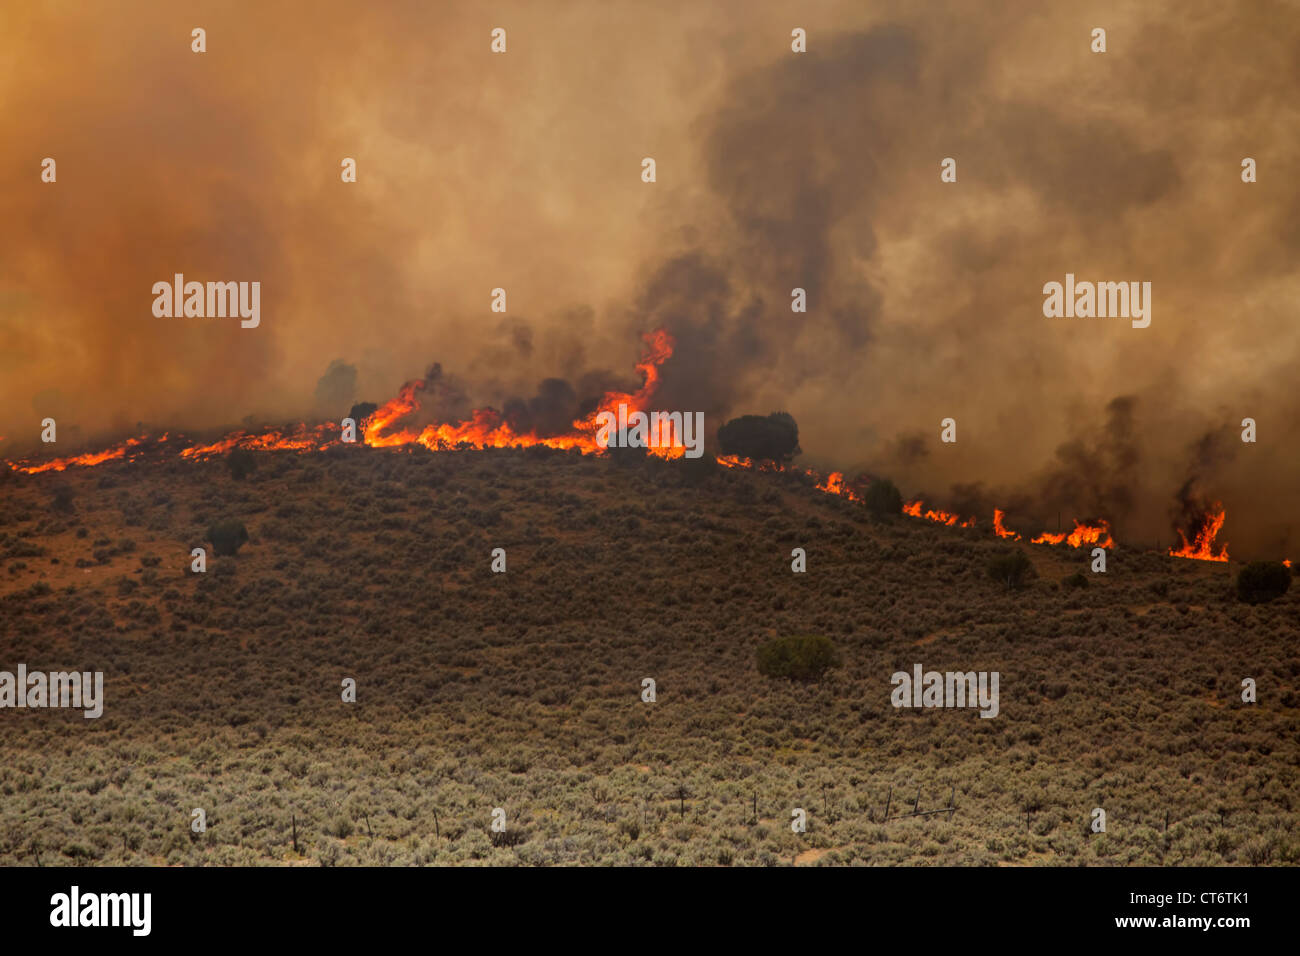 Wildfire rages out of control and burns hills in central Utah. Stock Photo